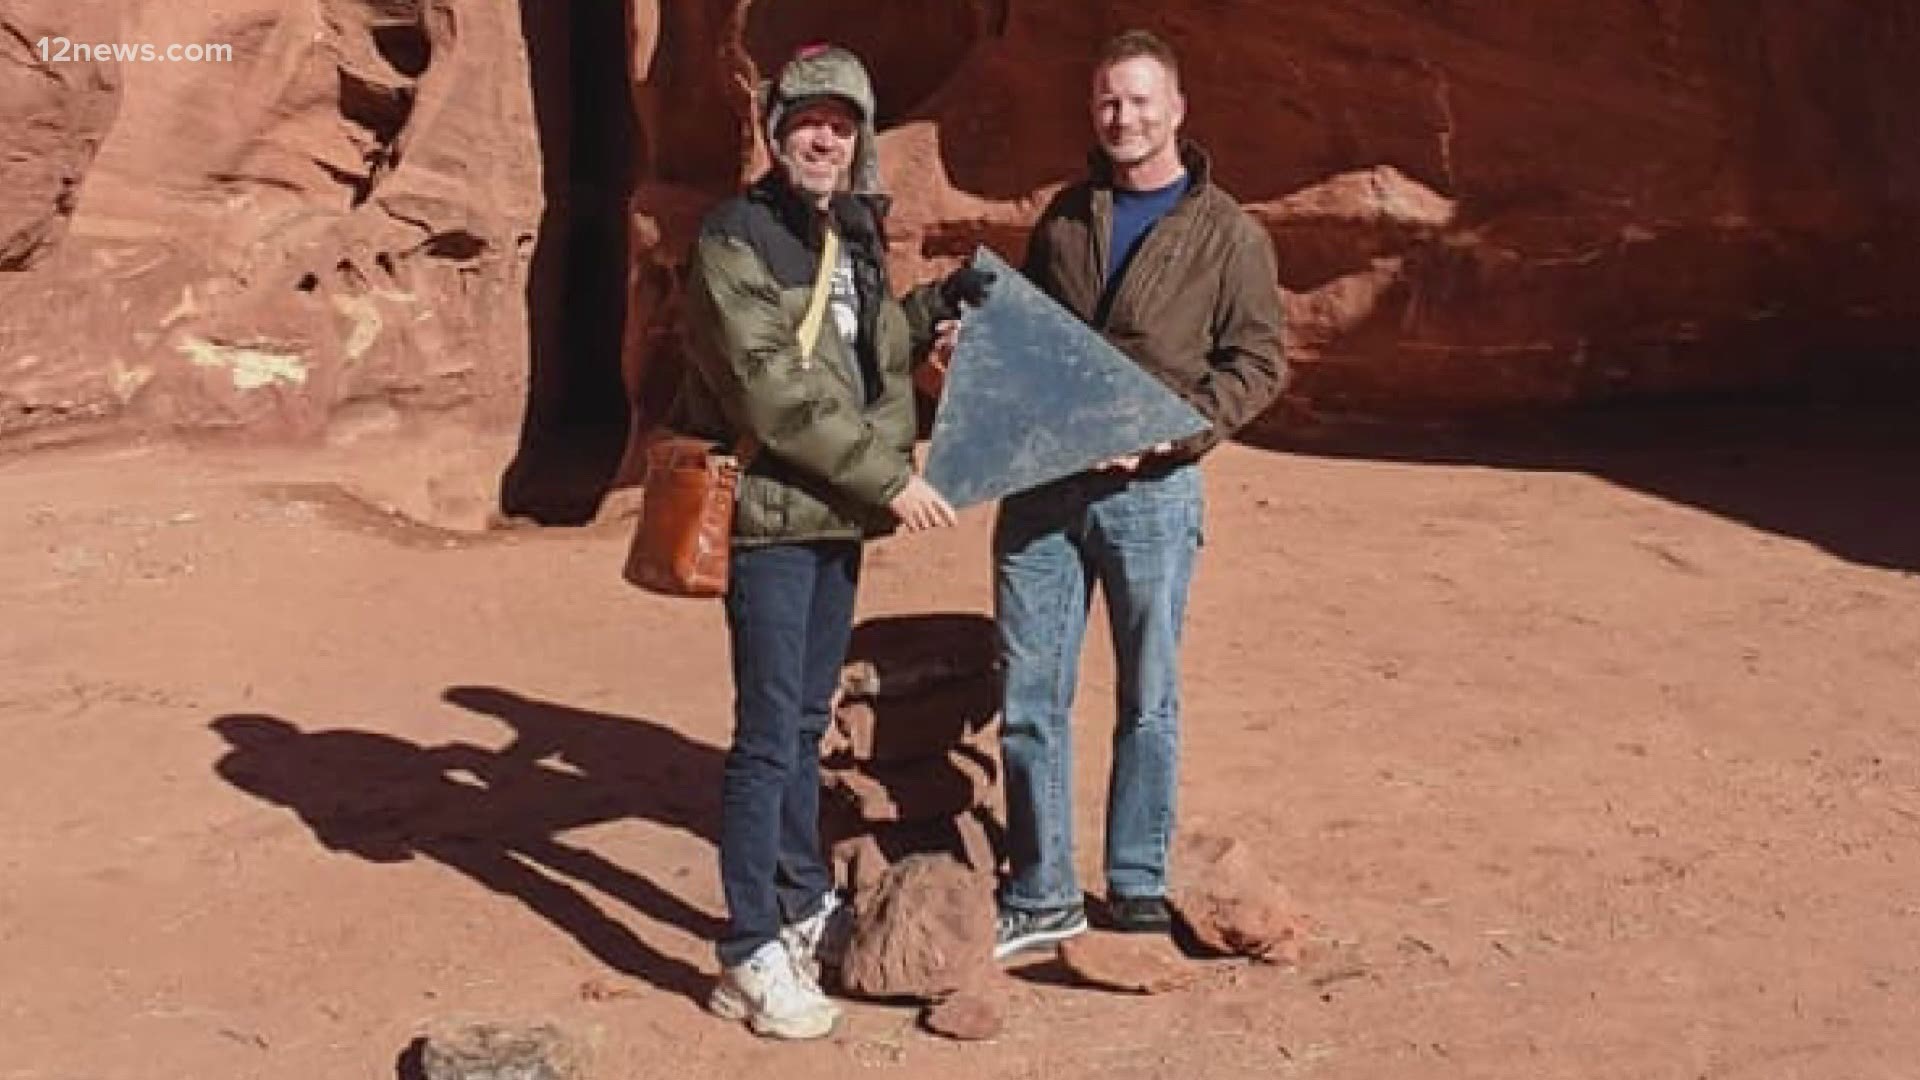 A Utah DPS helicopter crew spotted a metal monolith standing out in the middle of nowhere. Two friends from Flagstaff went to find it, only to discover it's missing.